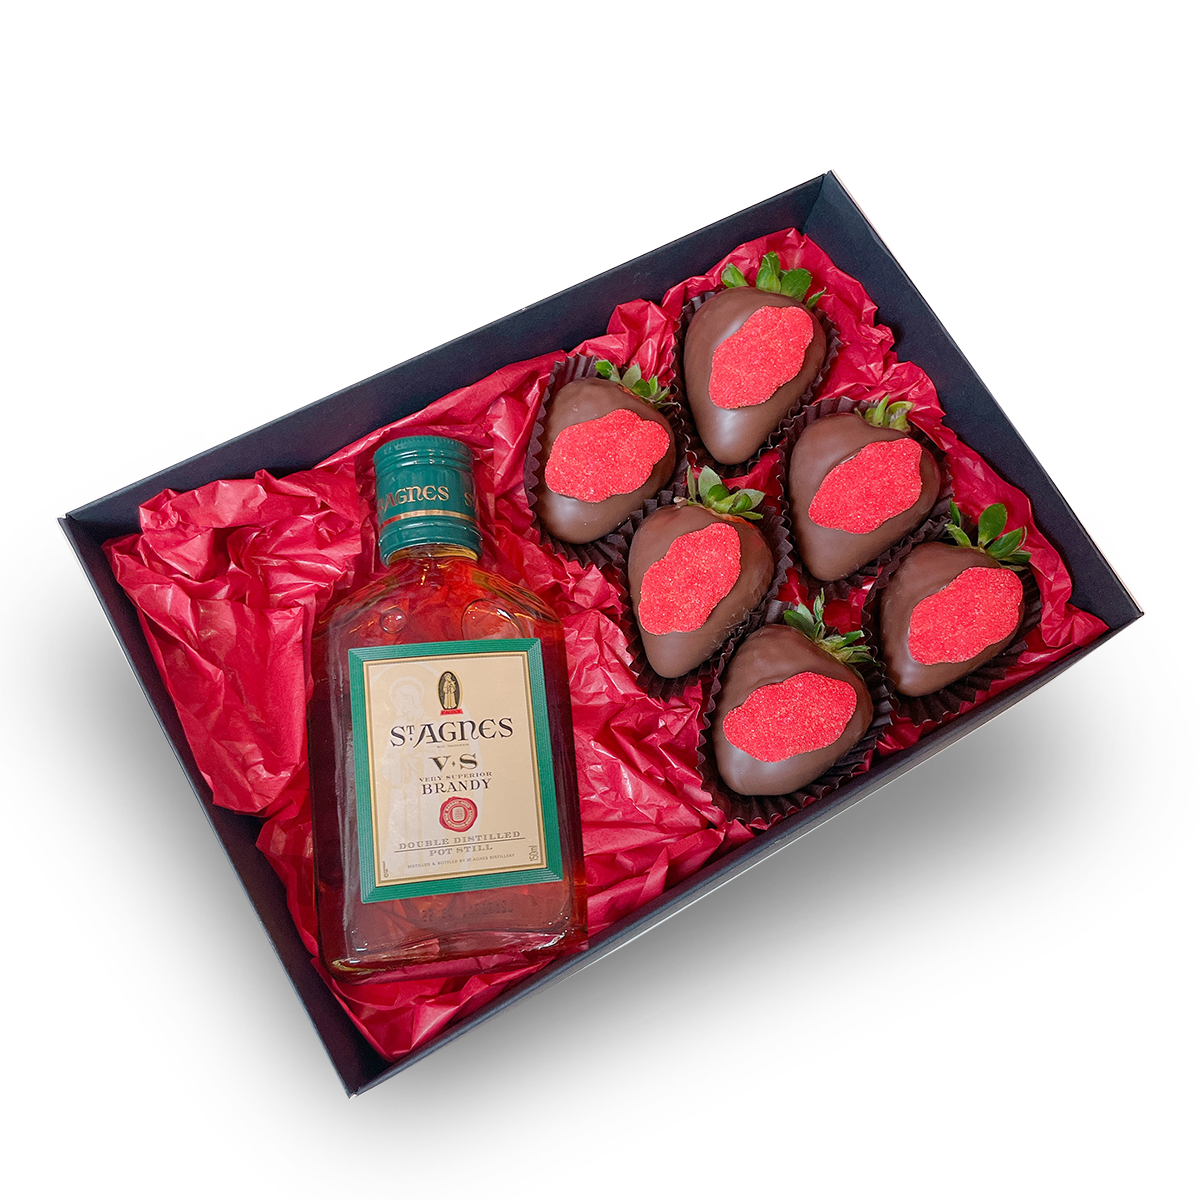 Brandy Gift Box, Sweet gift for him, Gift for a man same-day delivery Adelaide wide, Dessert Box and Brandy, Chocolate covered Strawberry box delivery, Chocolate Strawberries ST Agnes Brandy Box